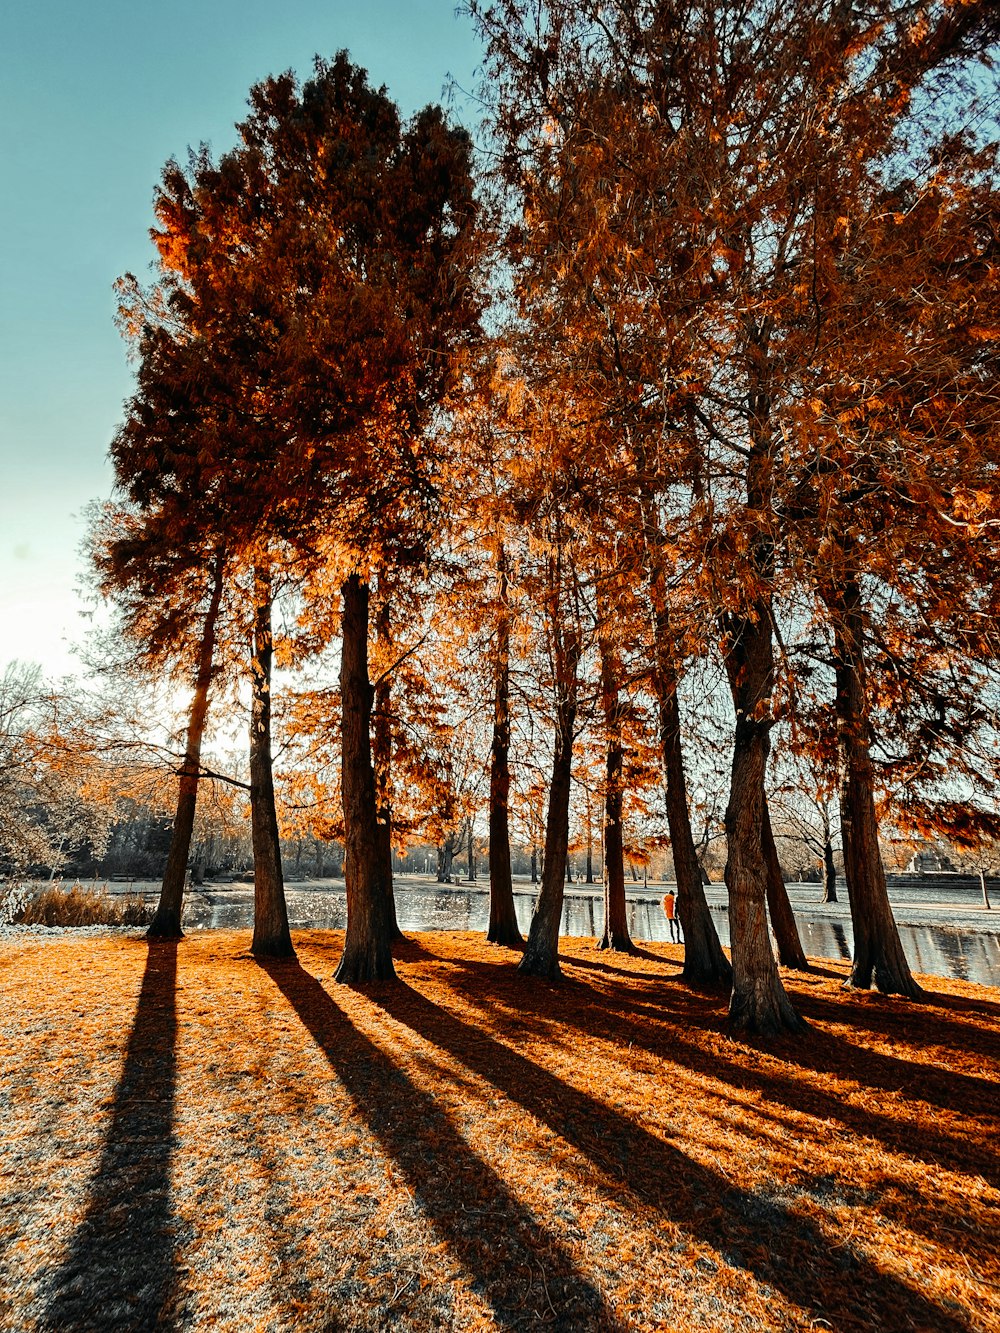 a row of trees casting long shadows on the ground